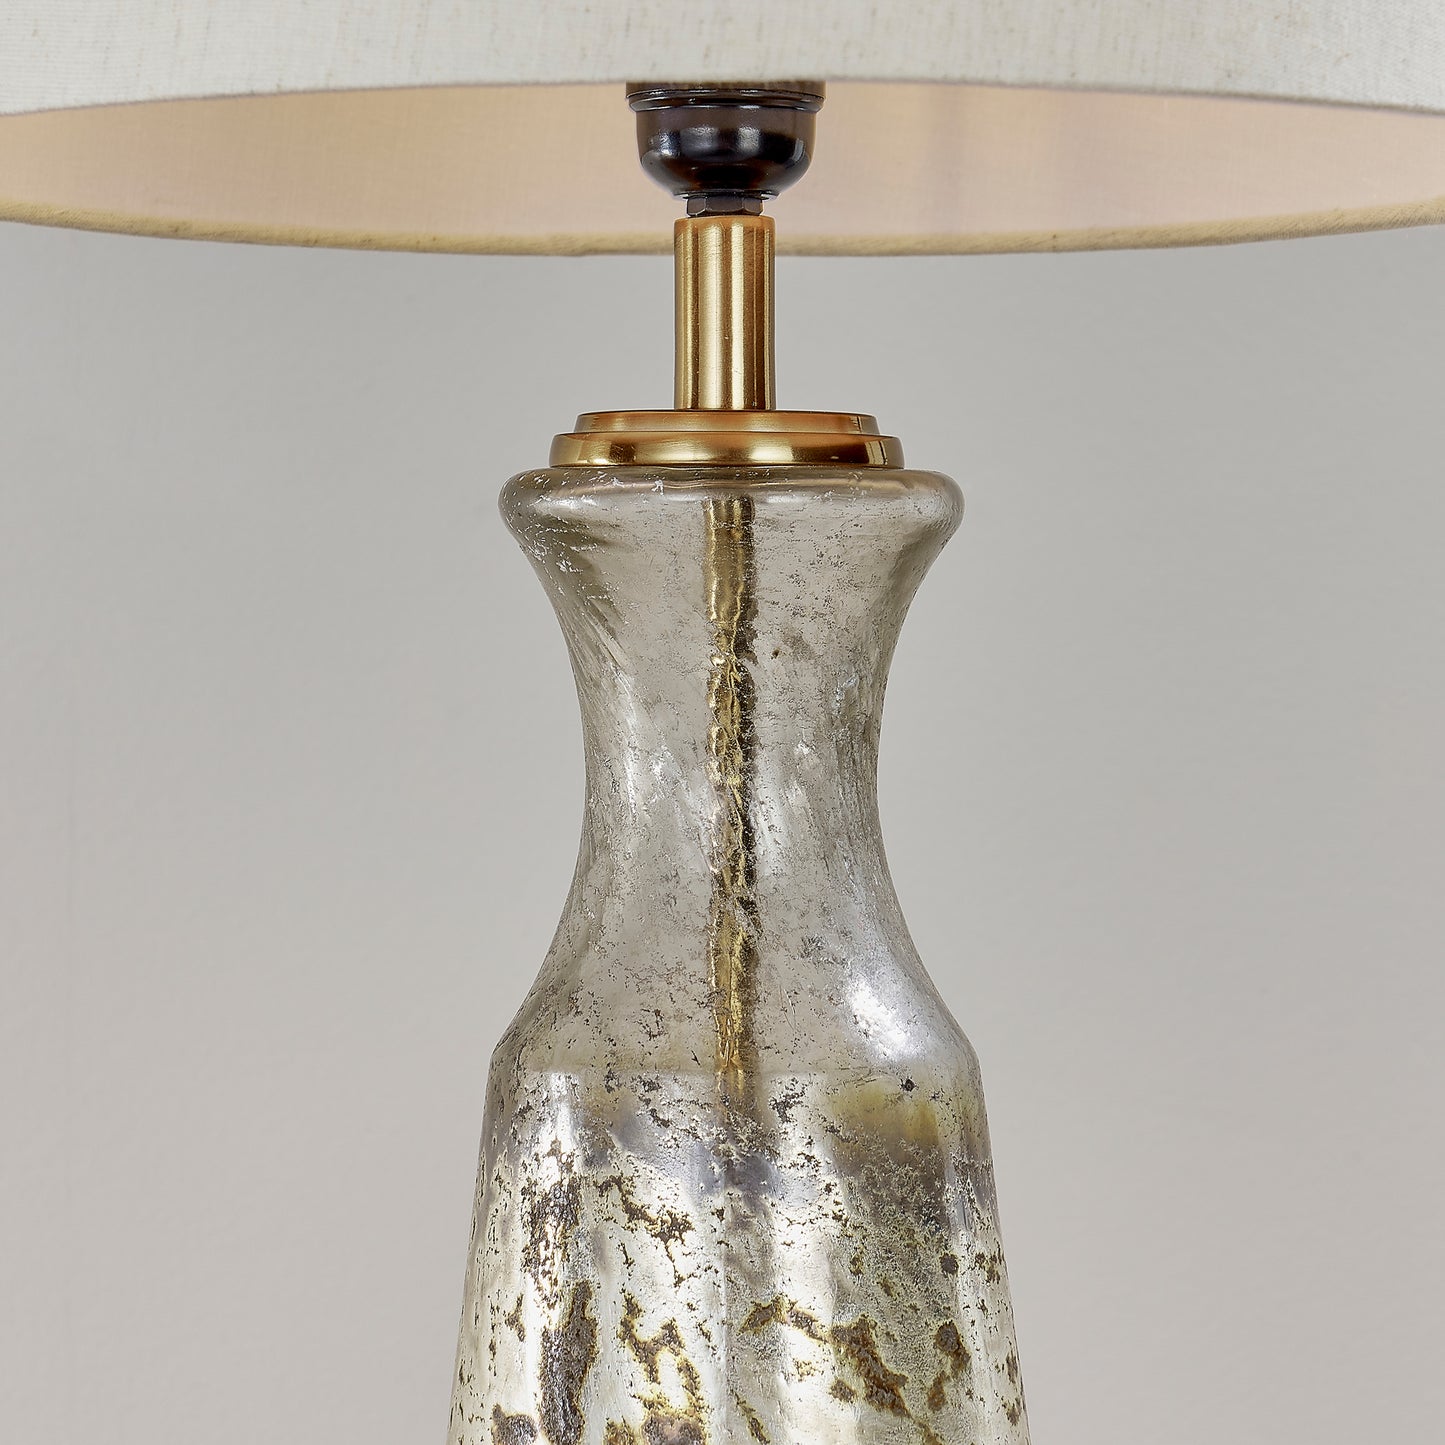 A Samuel 1 Table Light by Kikiathome.co.uk perfect for home decor.